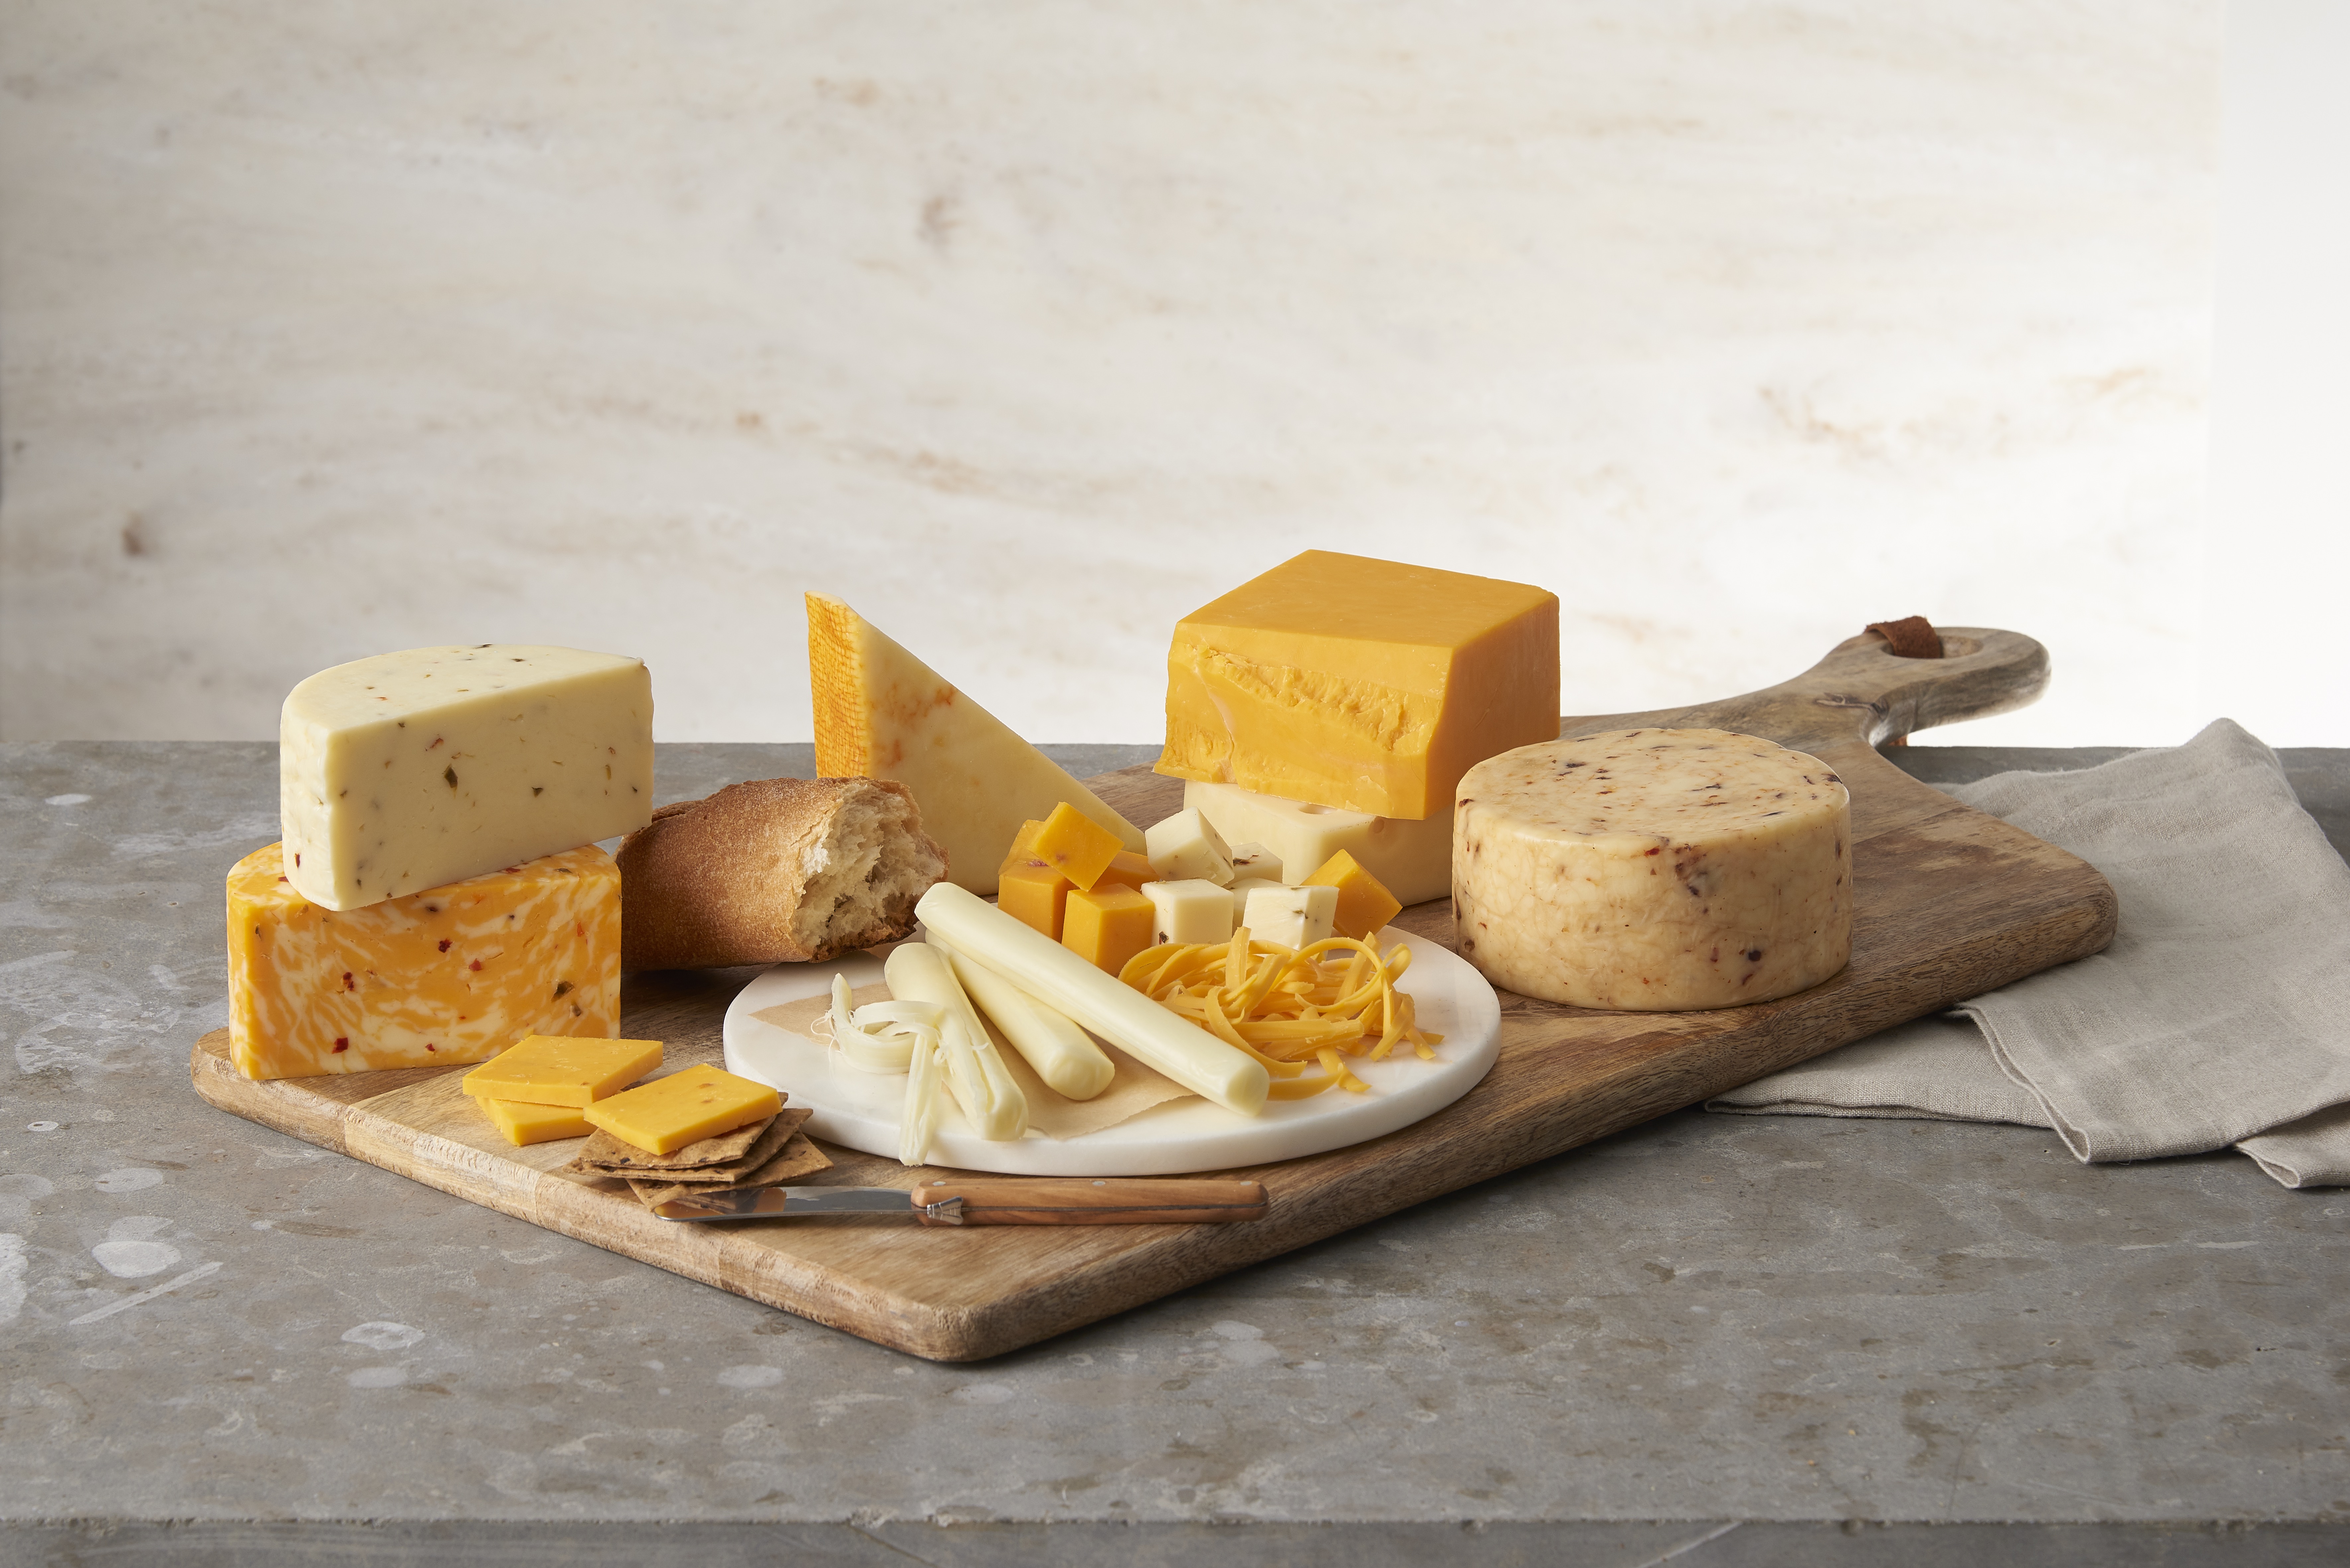 Selection of cheeses on a wooden board